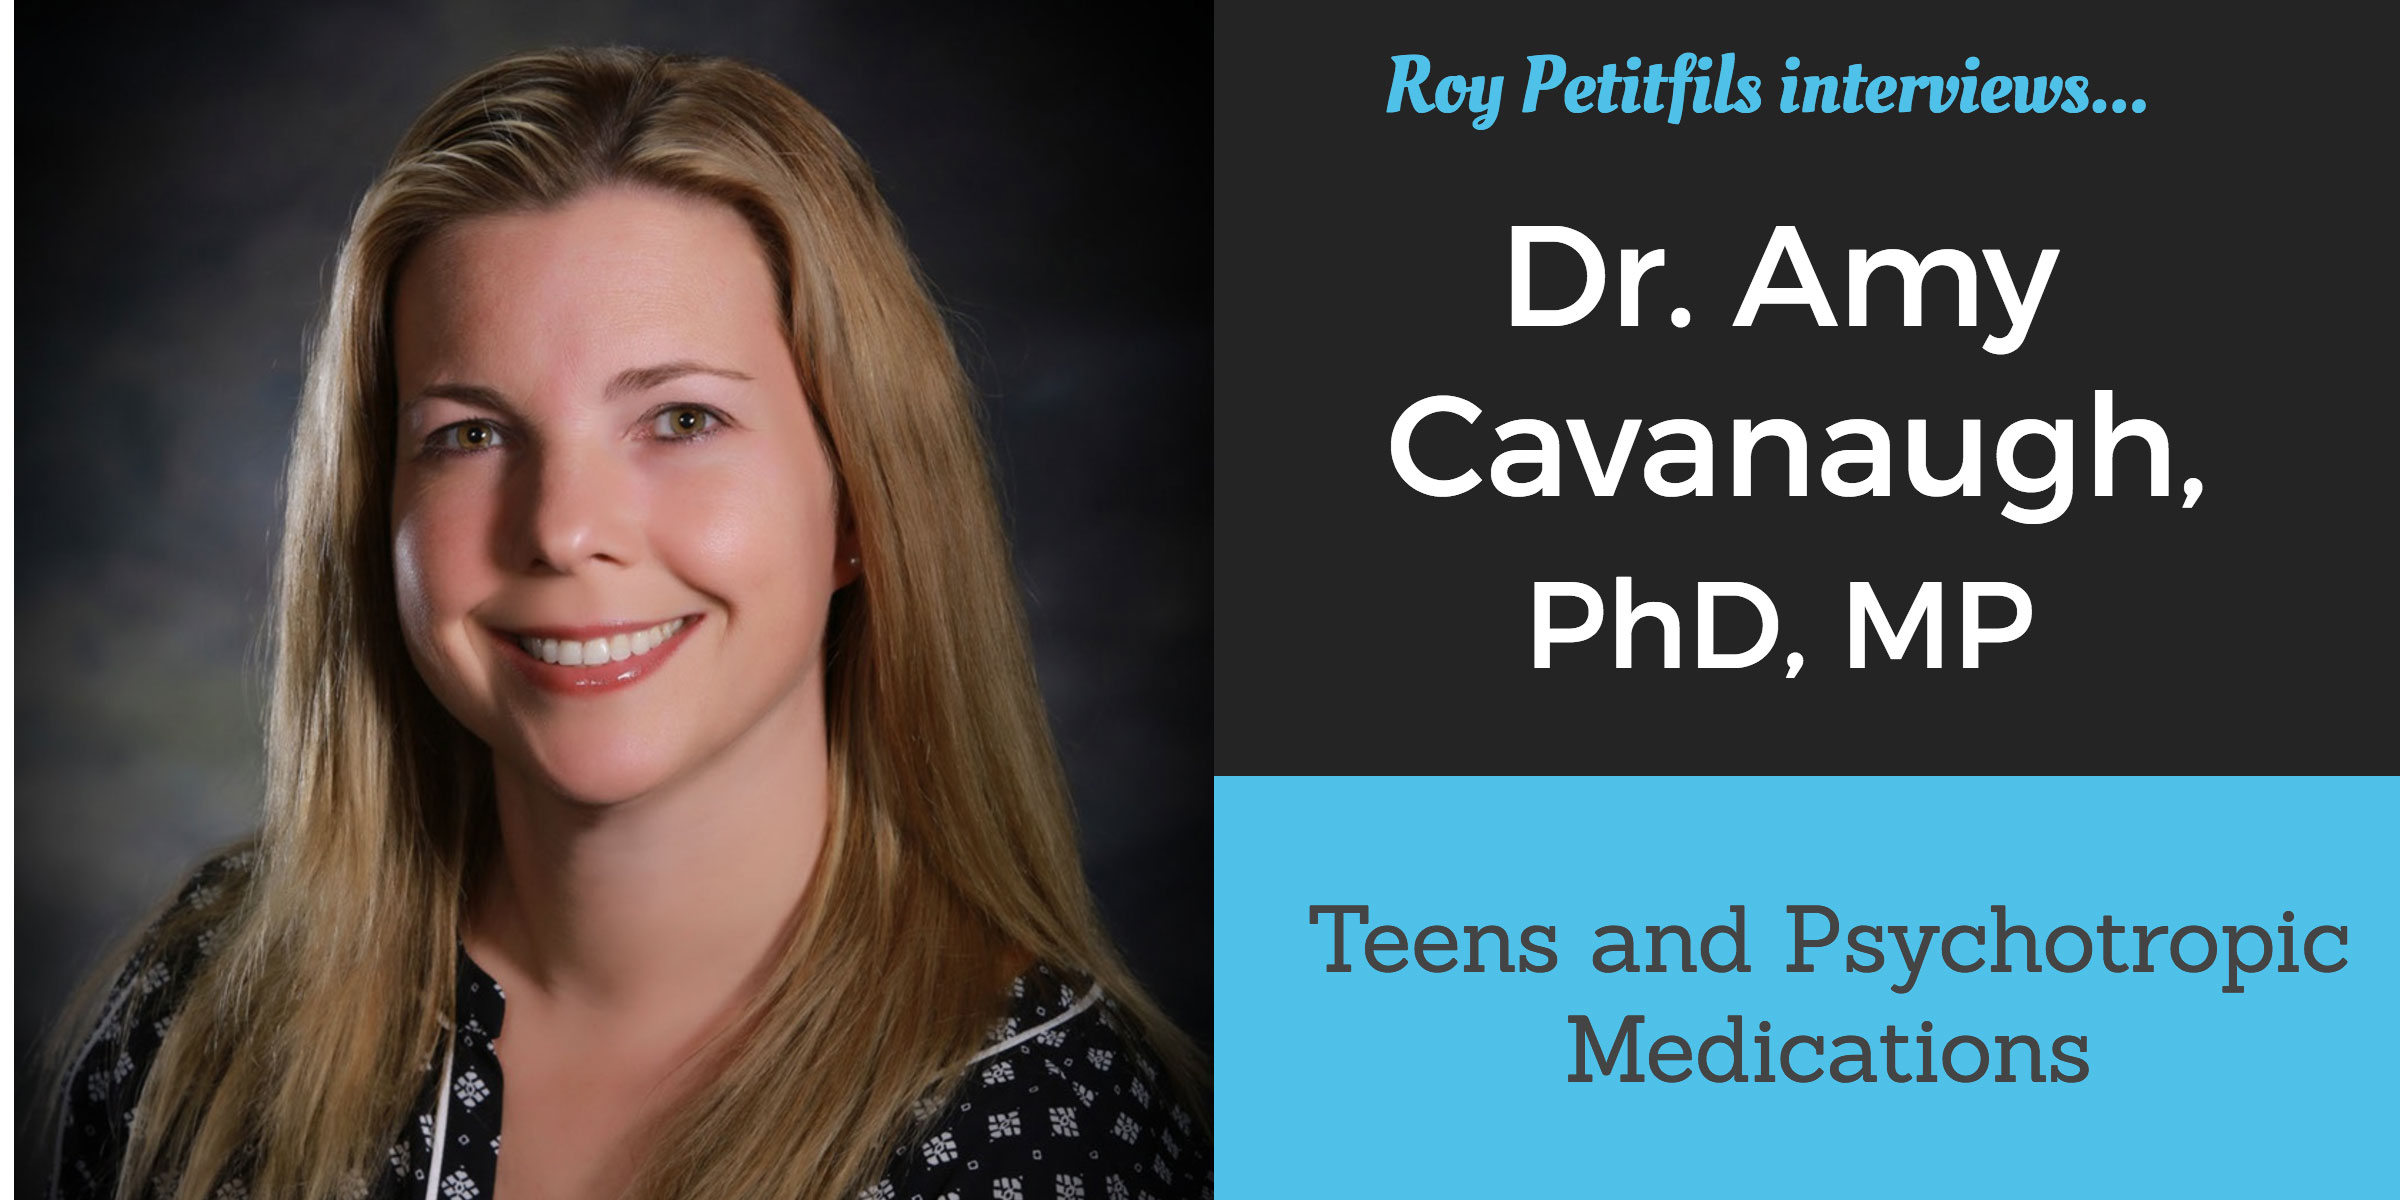 Teens and Psychotropic Medication: An Interview with Dr. Amy Cavanaugh